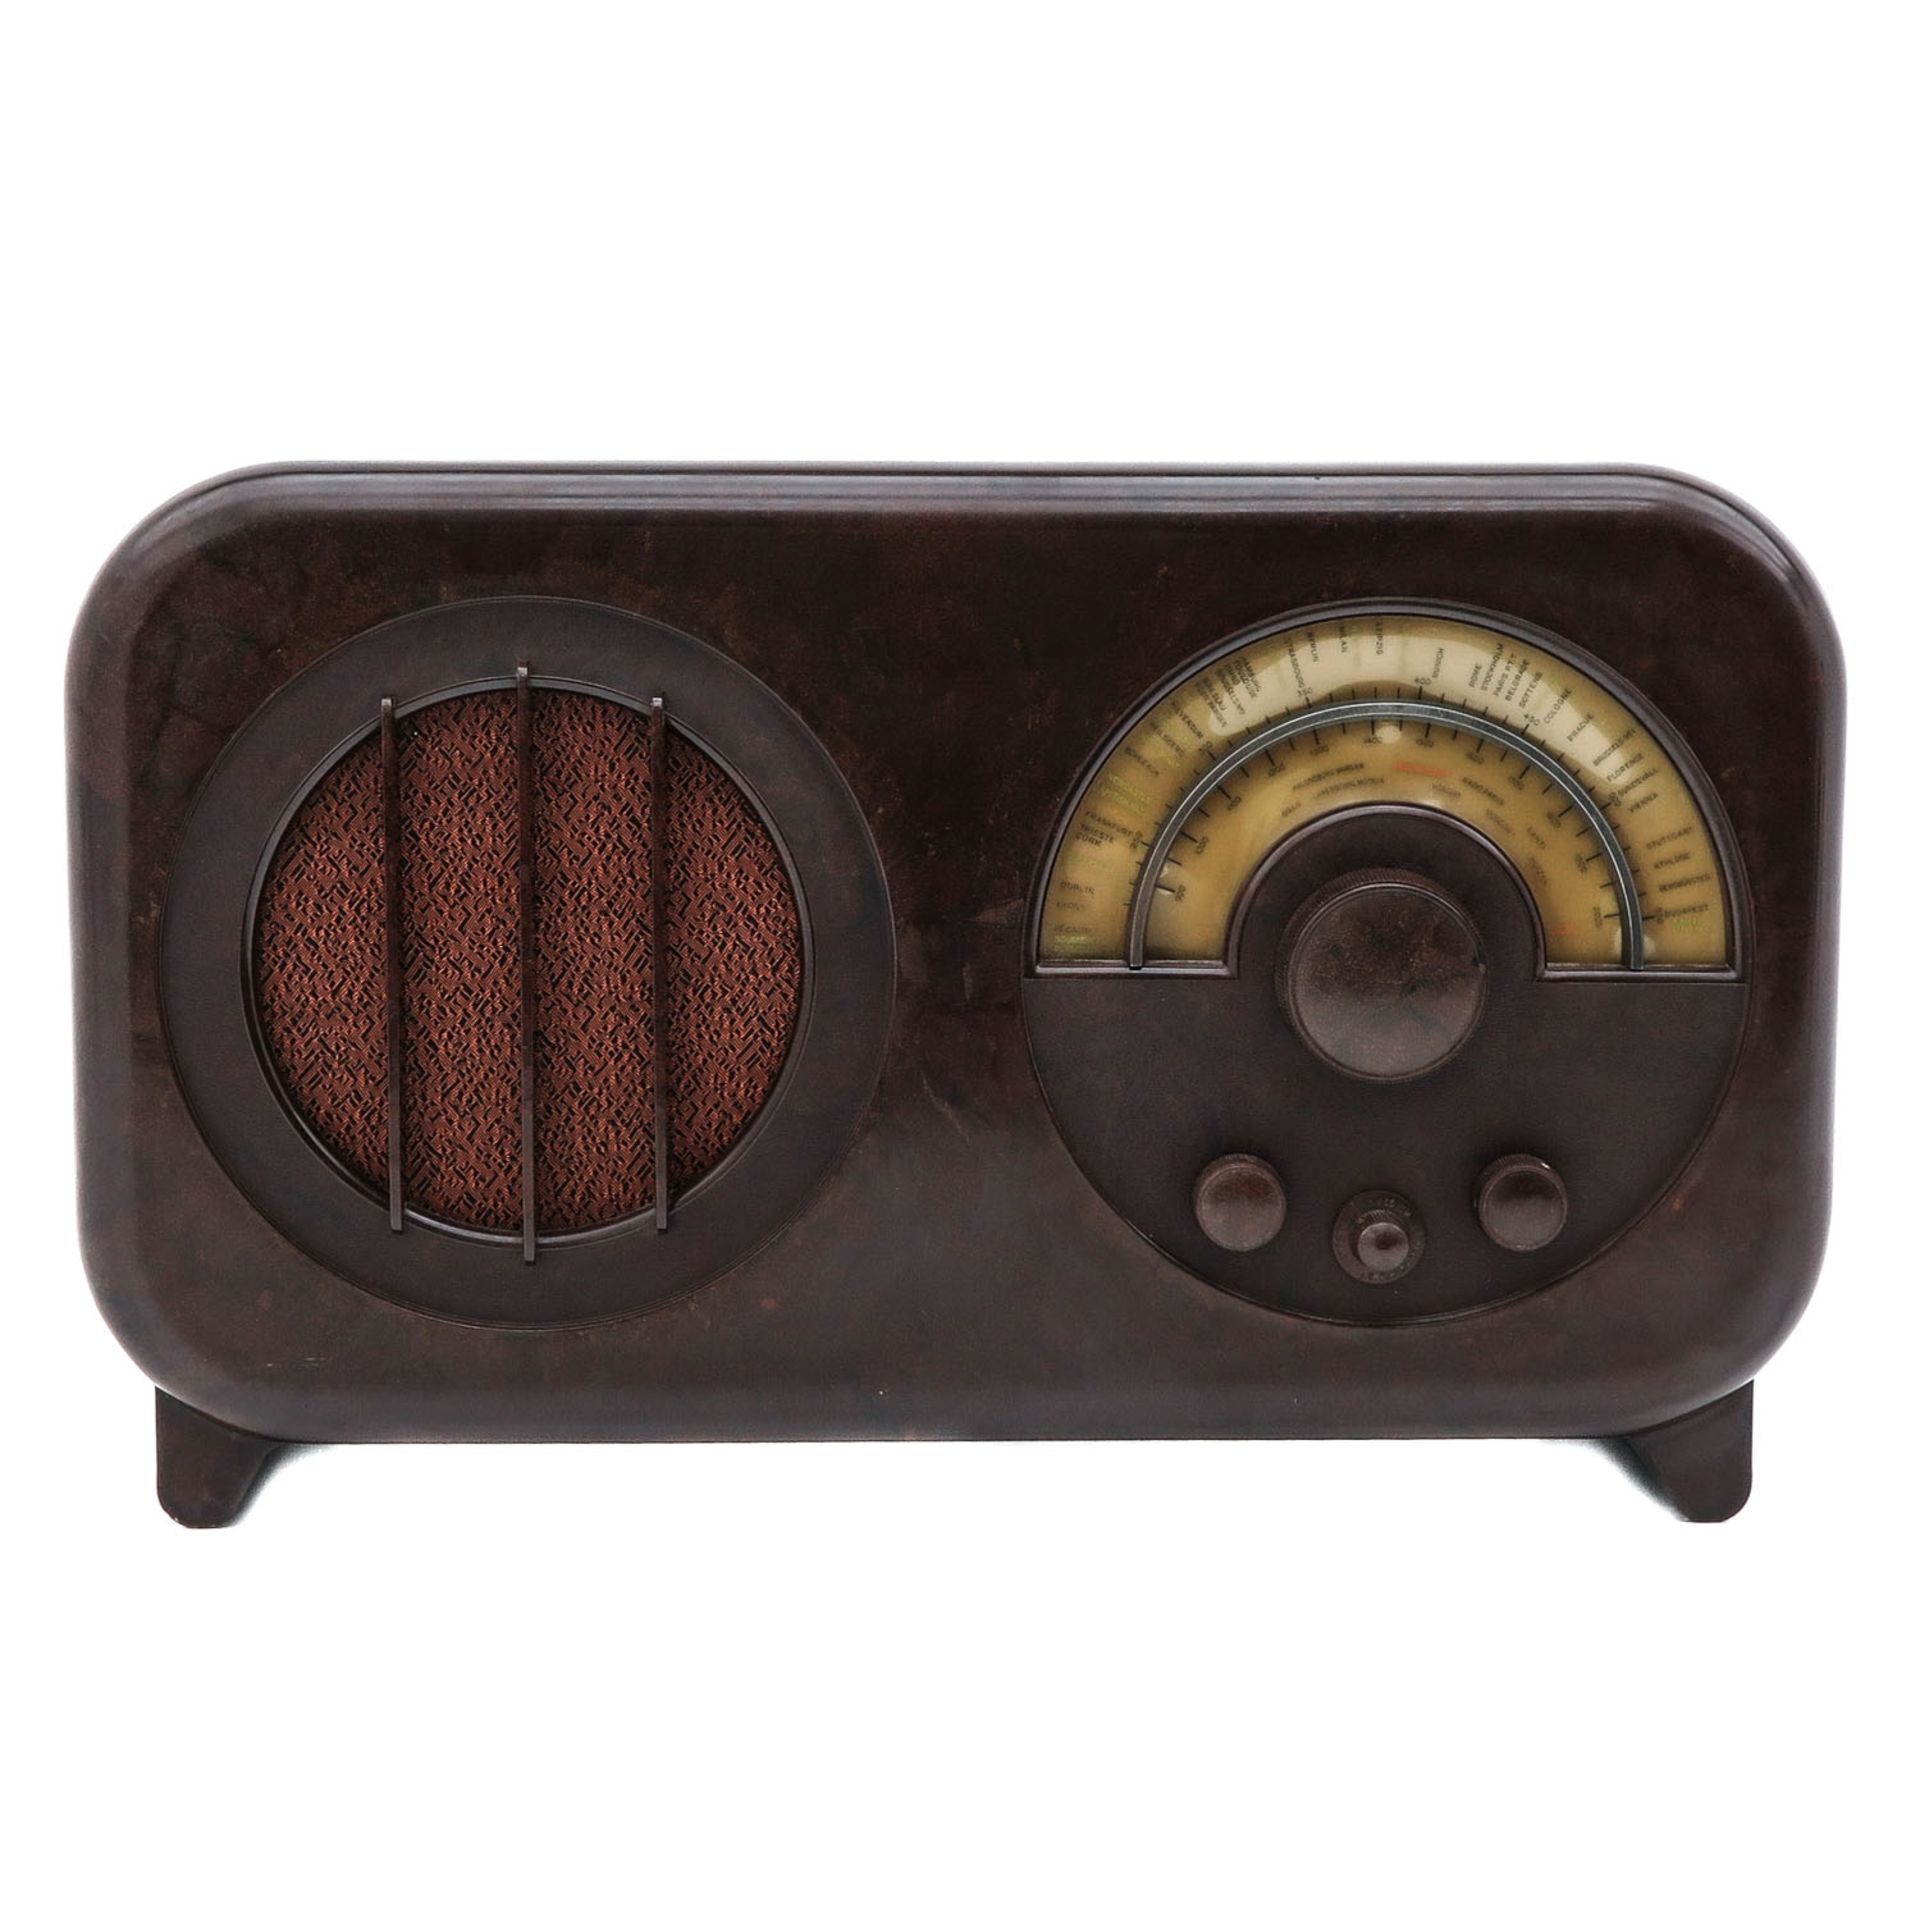 A Collection of 5 Bakelite Radios - Image 7 of 7